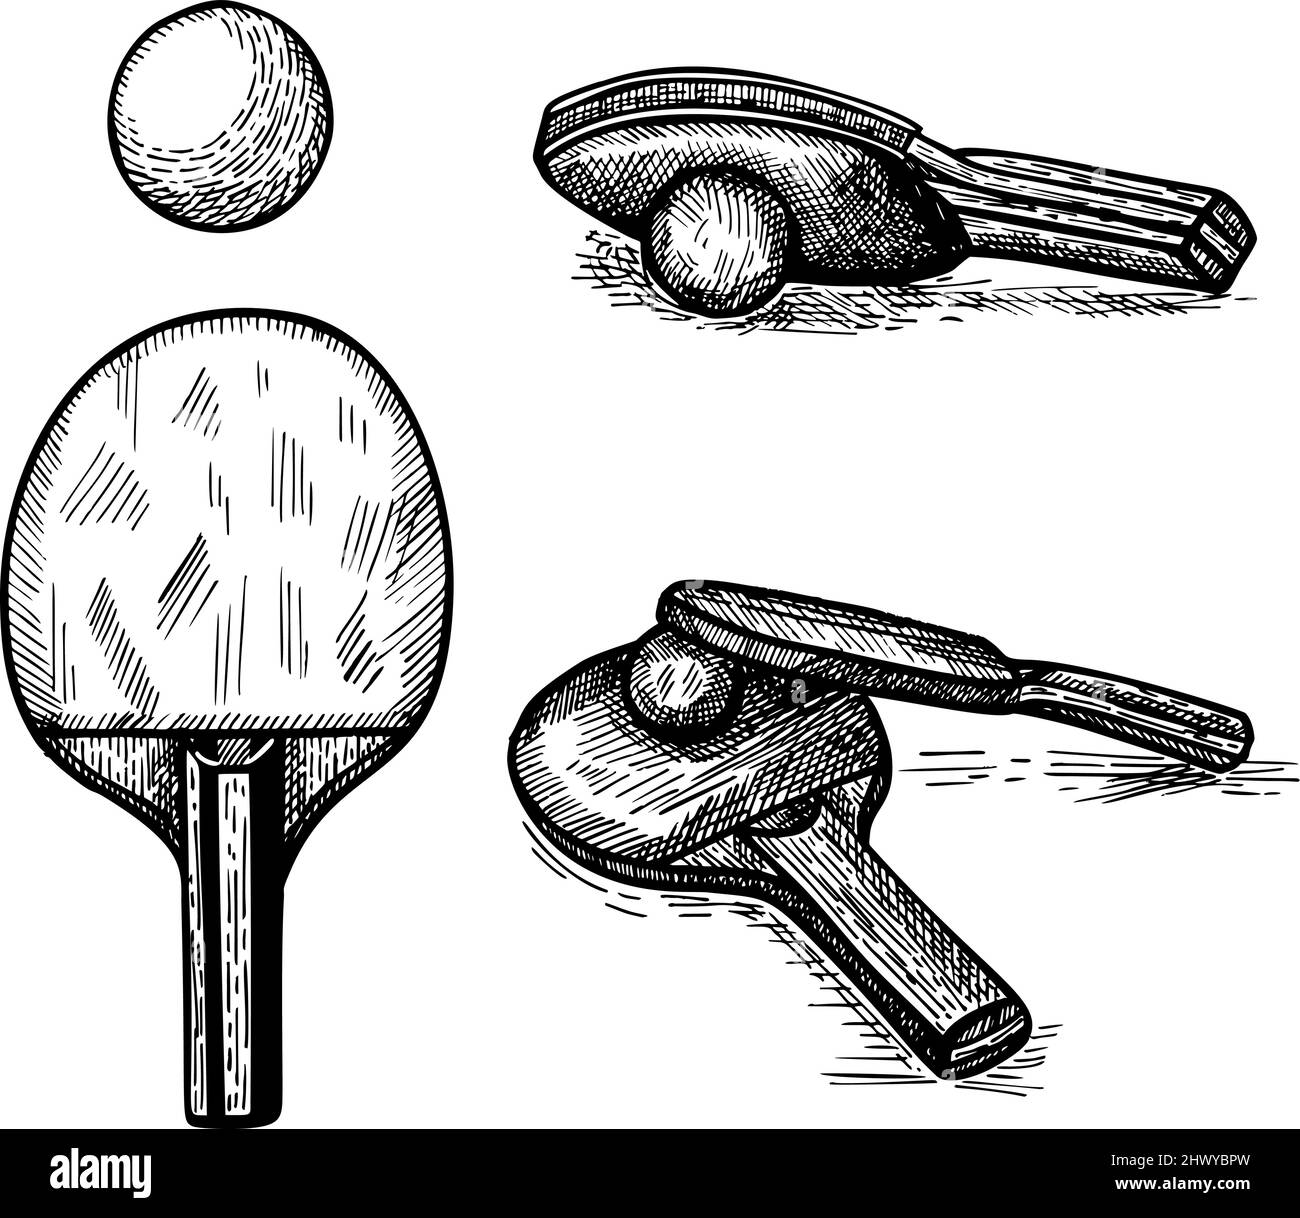 How to Make a Table Tennis Vector Illustration | Envato Tuts+